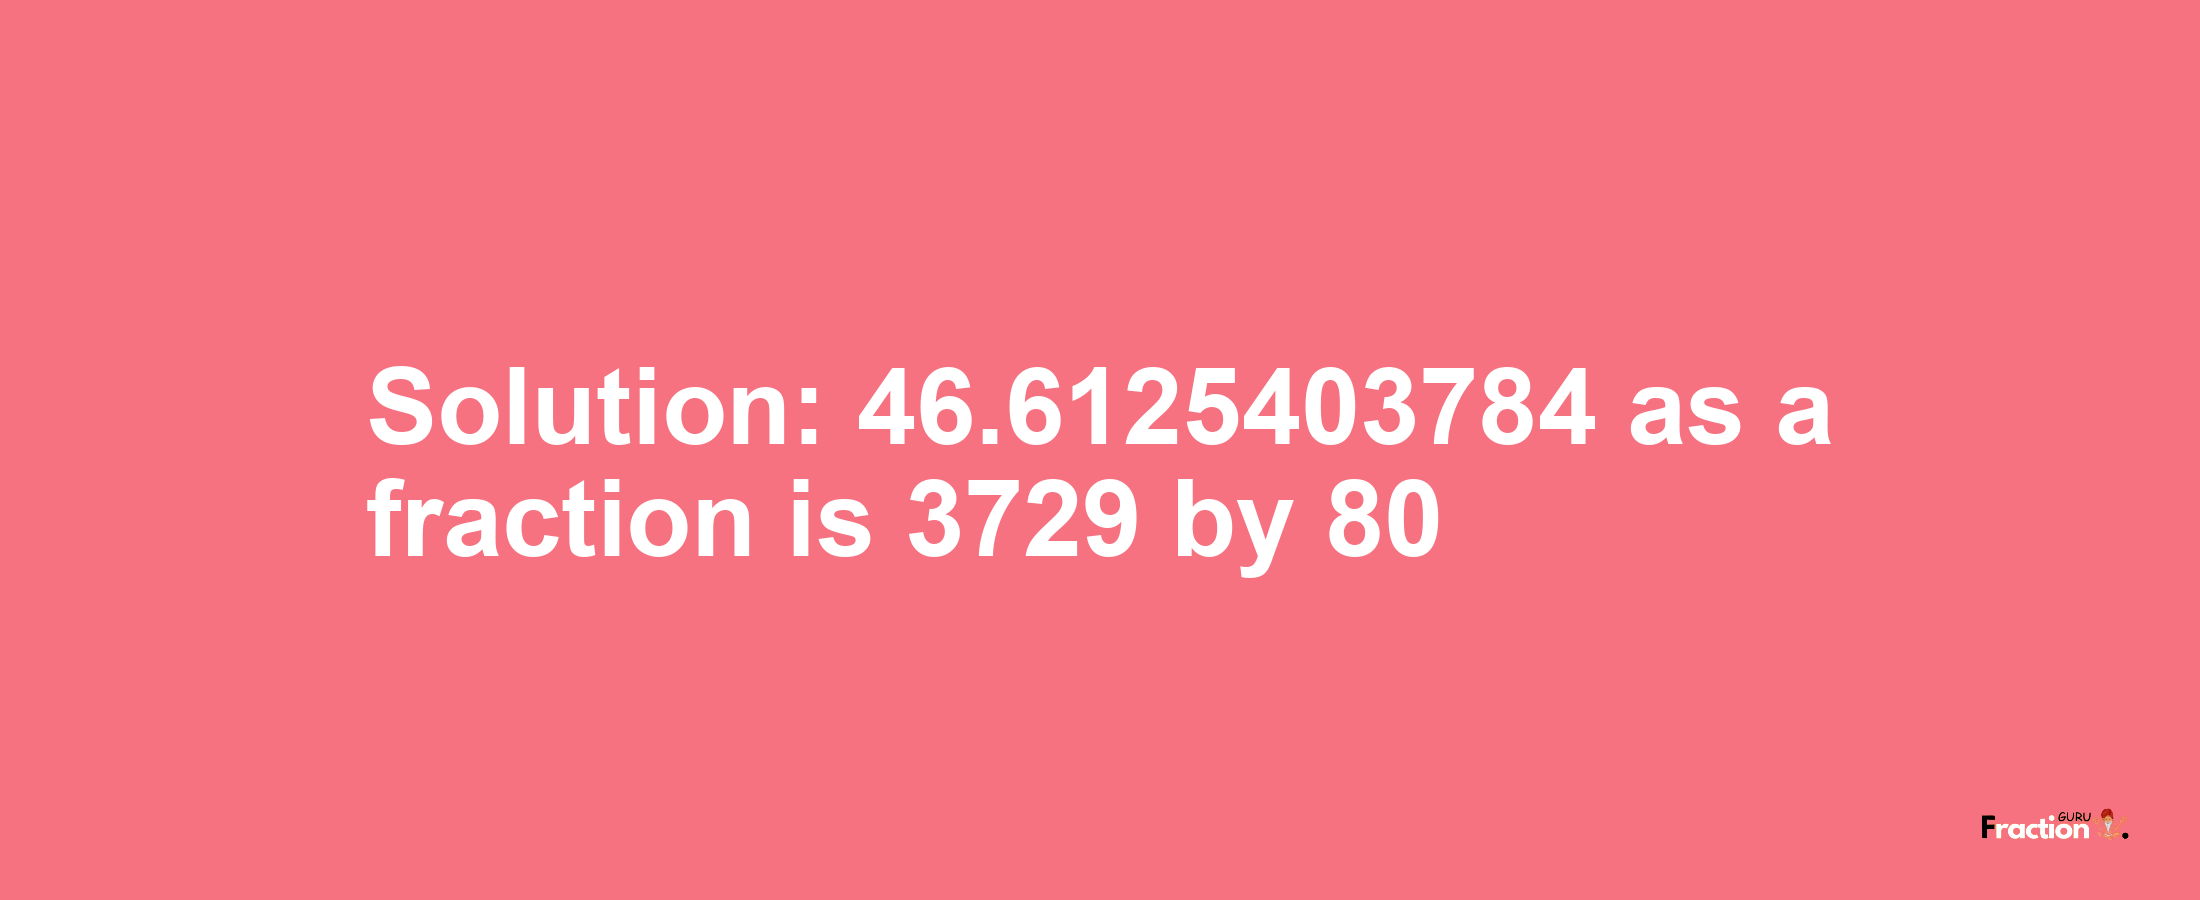 Solution:46.6125403784 as a fraction is 3729/80